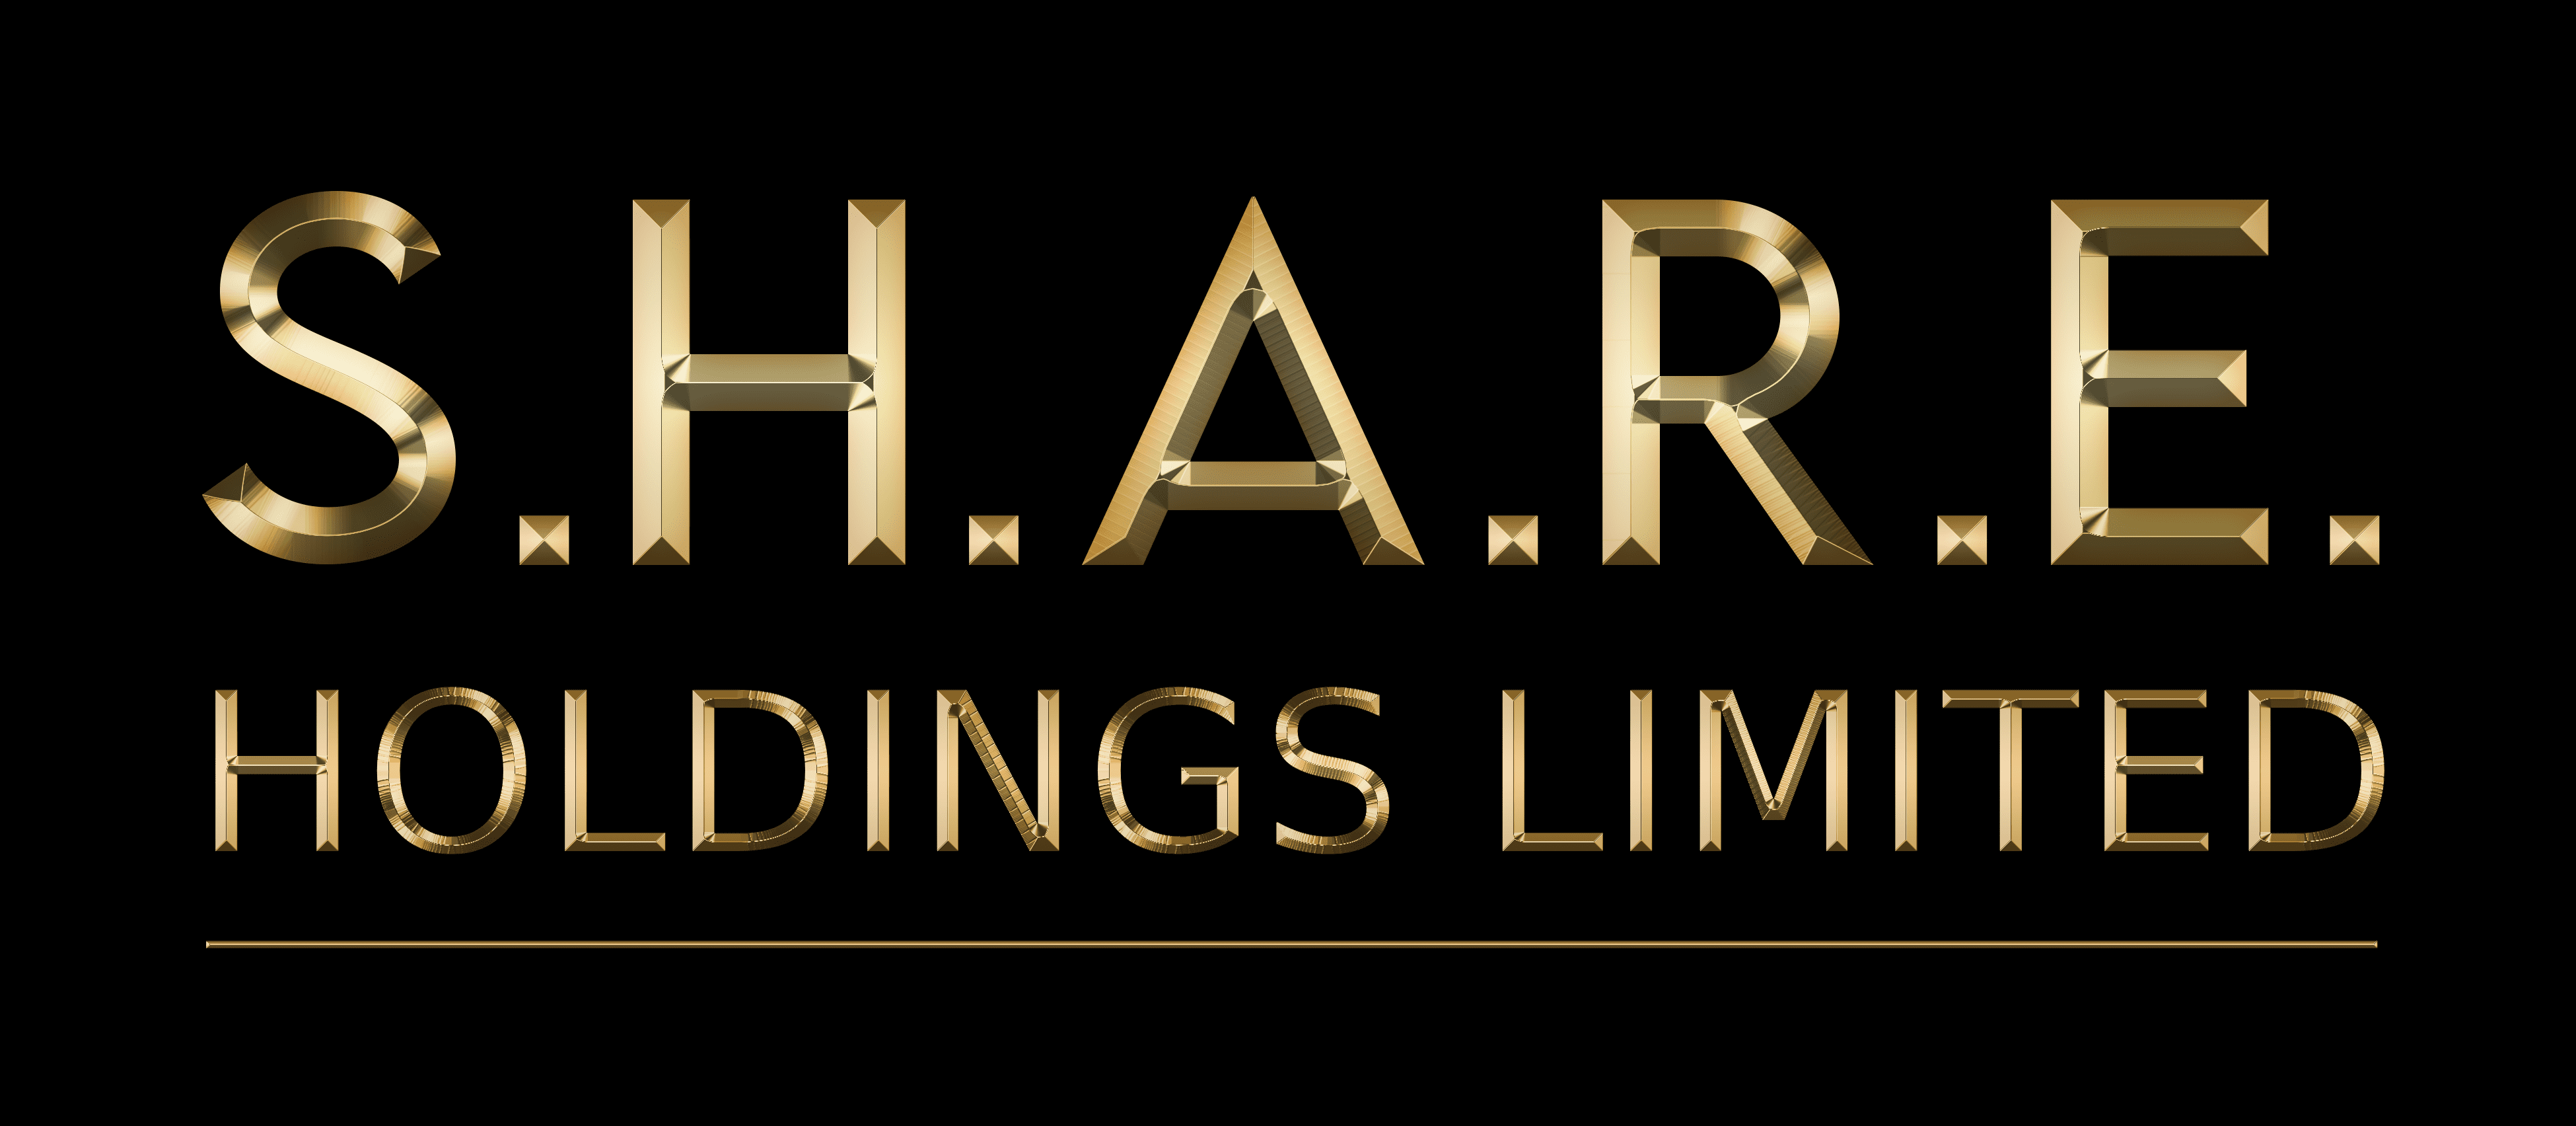 S.H.A.R.E. HOLDINGS LIMITED